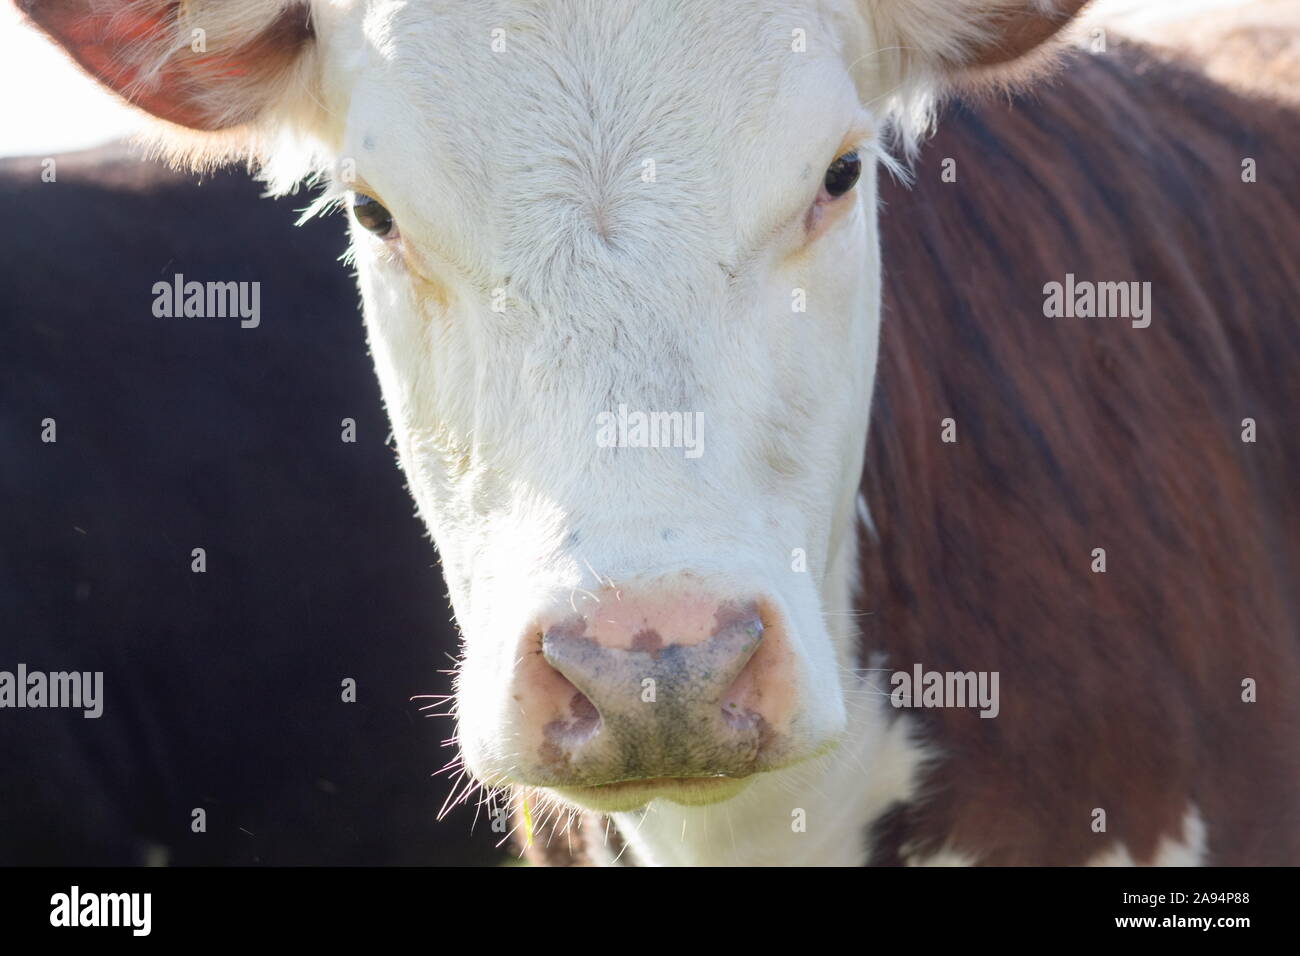 close up image of a cow looking into the camera full frame Stock Photo